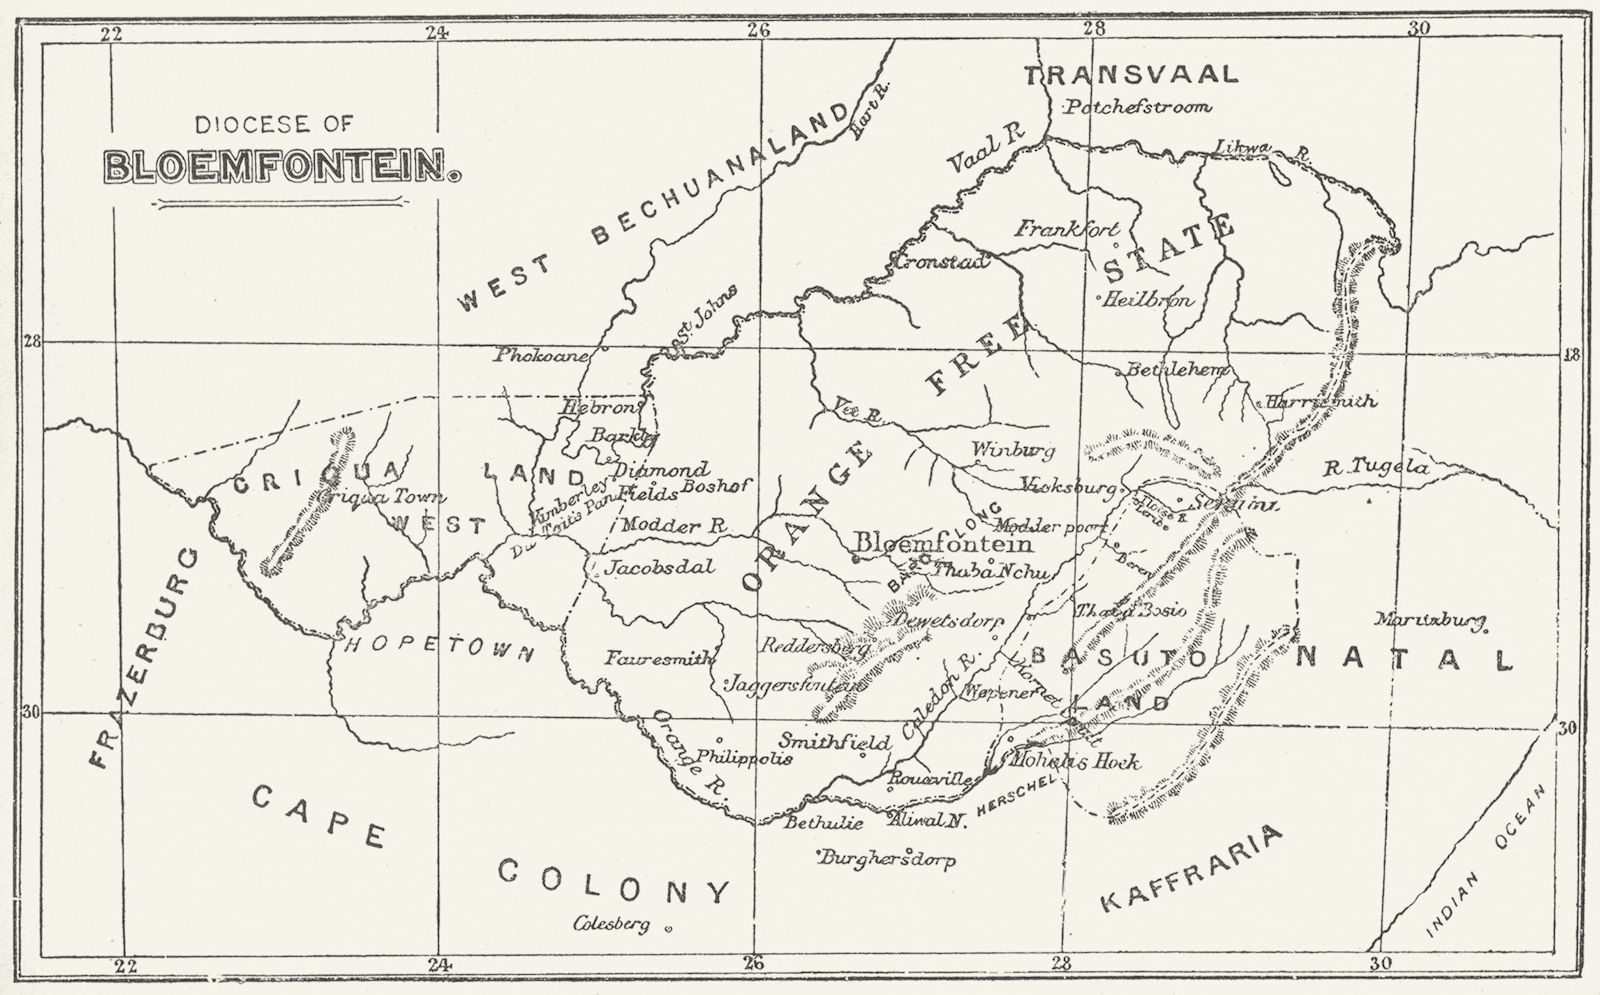 ANGLICAN DIOCESE OF BLOEMFONTEIN. Showing towns. SOUTH AFRICA 1897 old map